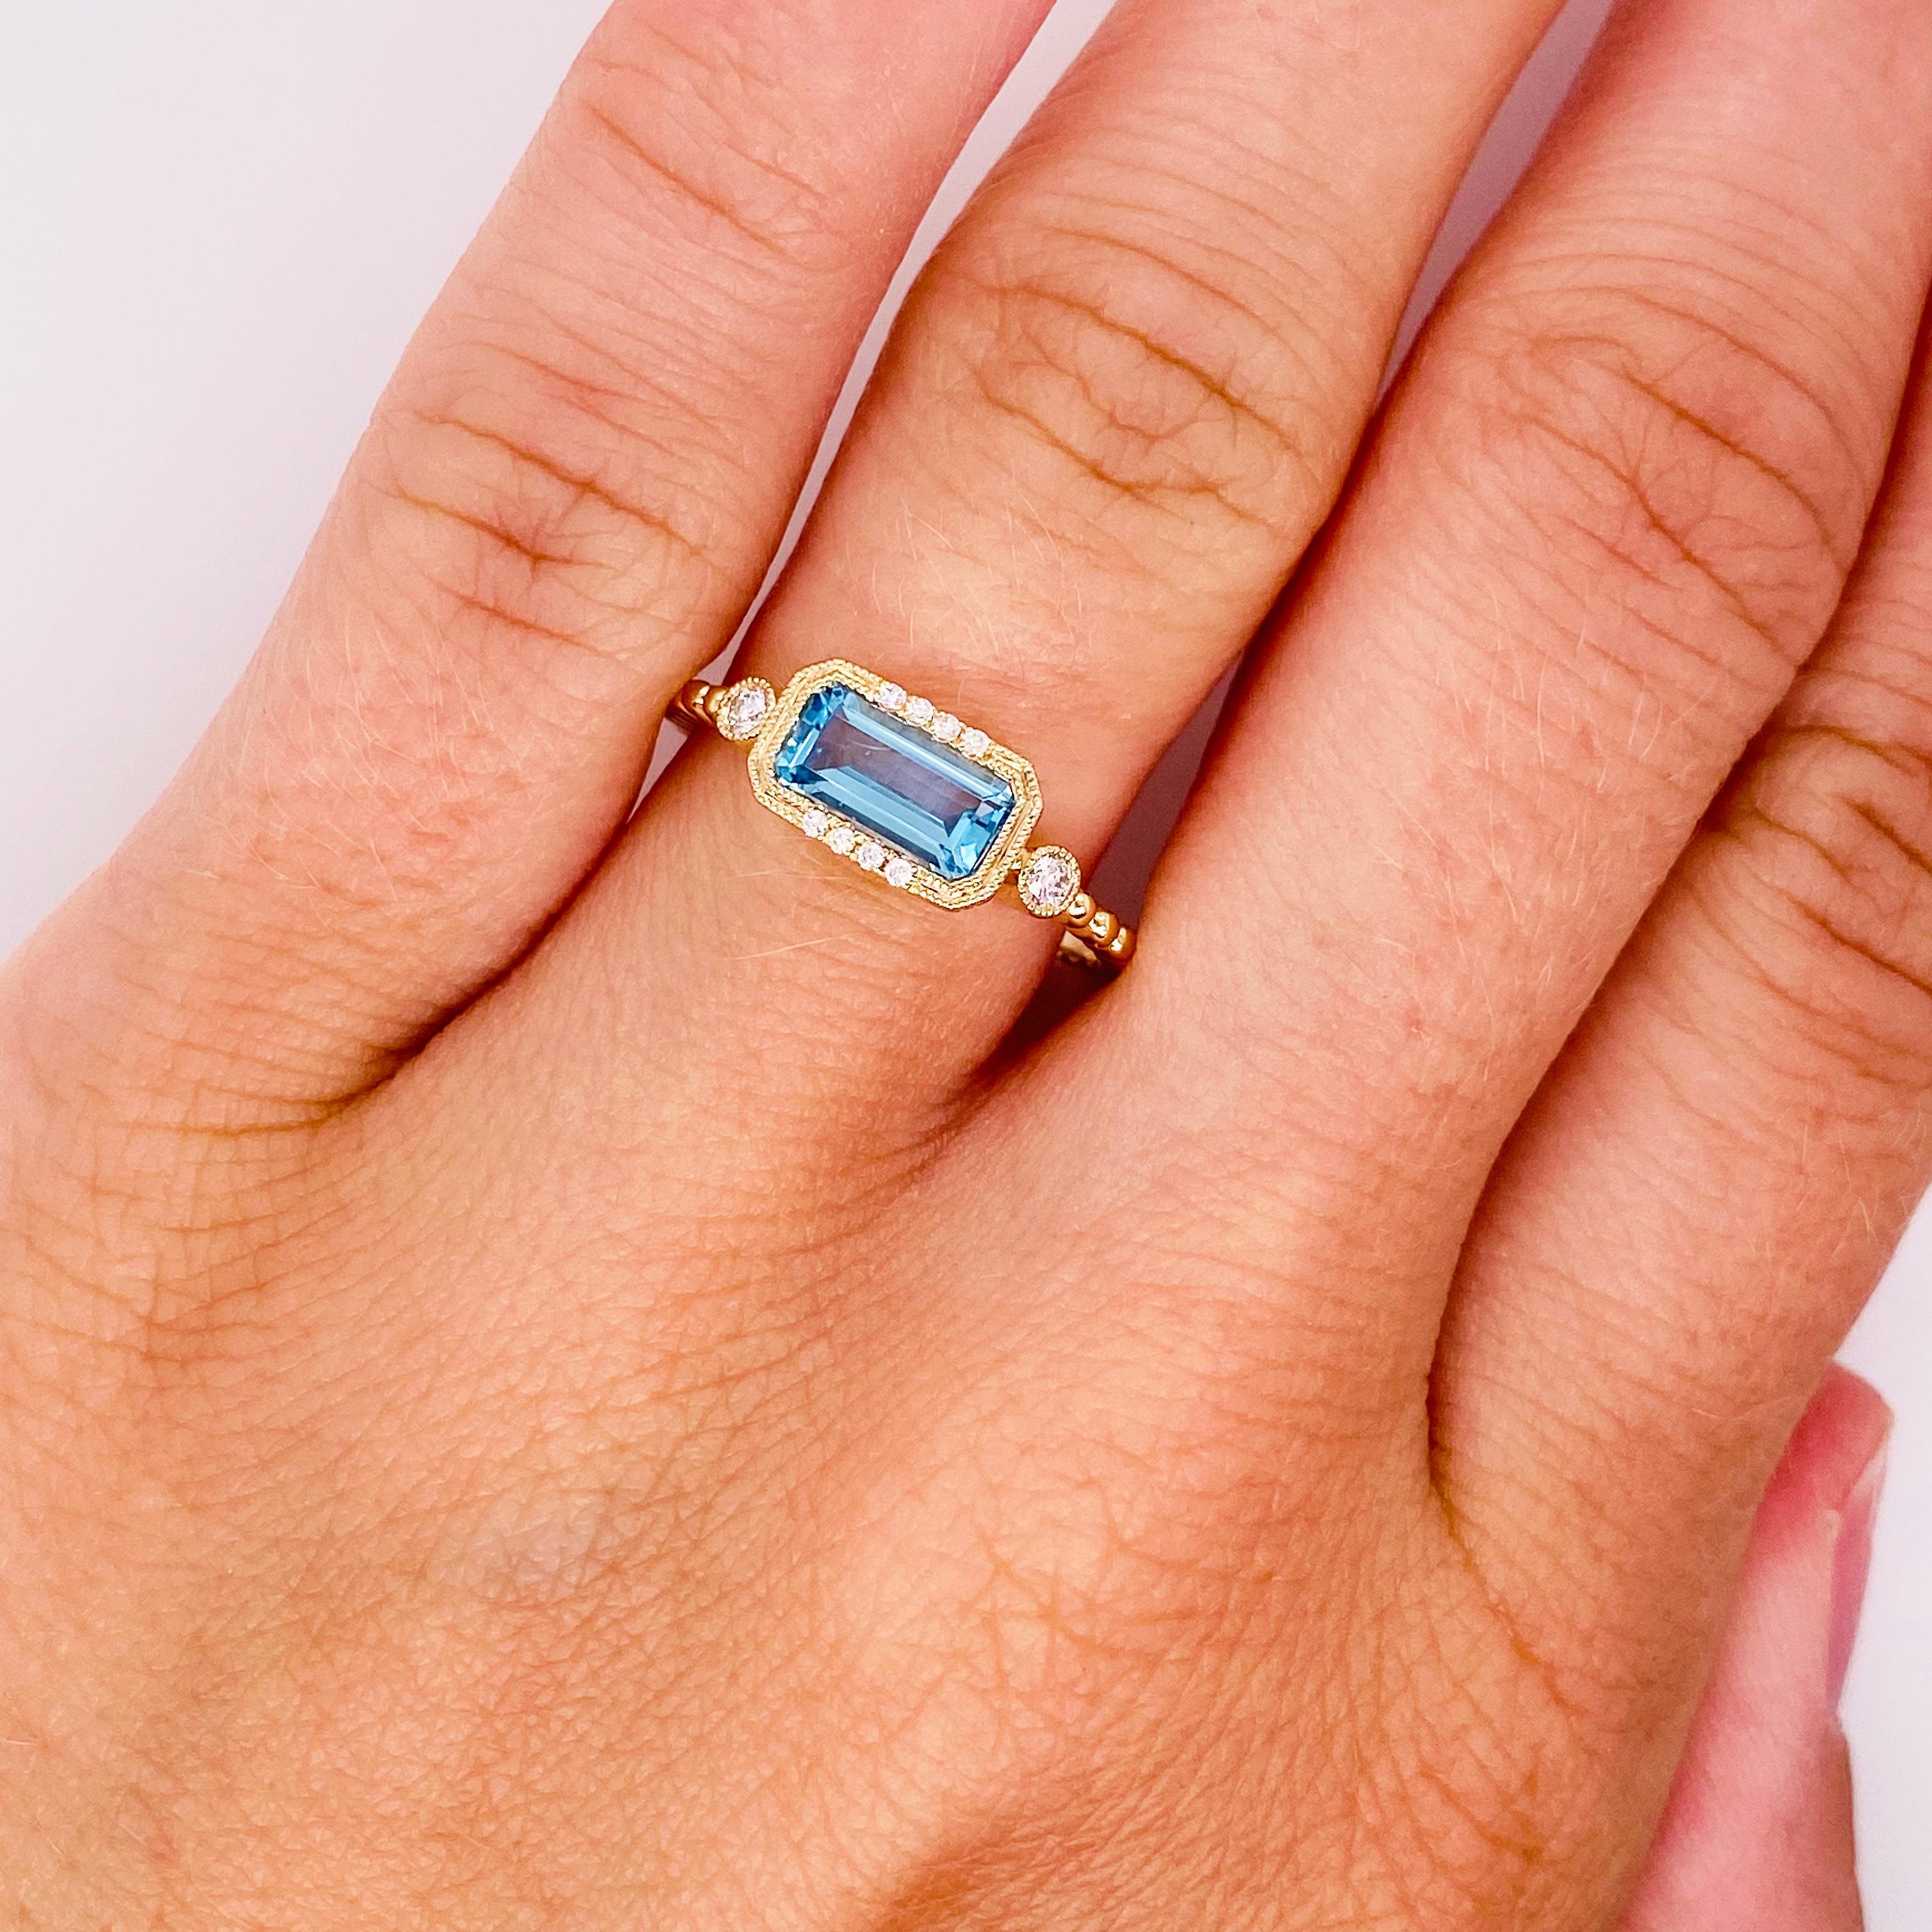 For Sale:  Blue Topaz Diamond Ring 14K Gold Emerald Cut Topaz Modern Ring, East to West 2